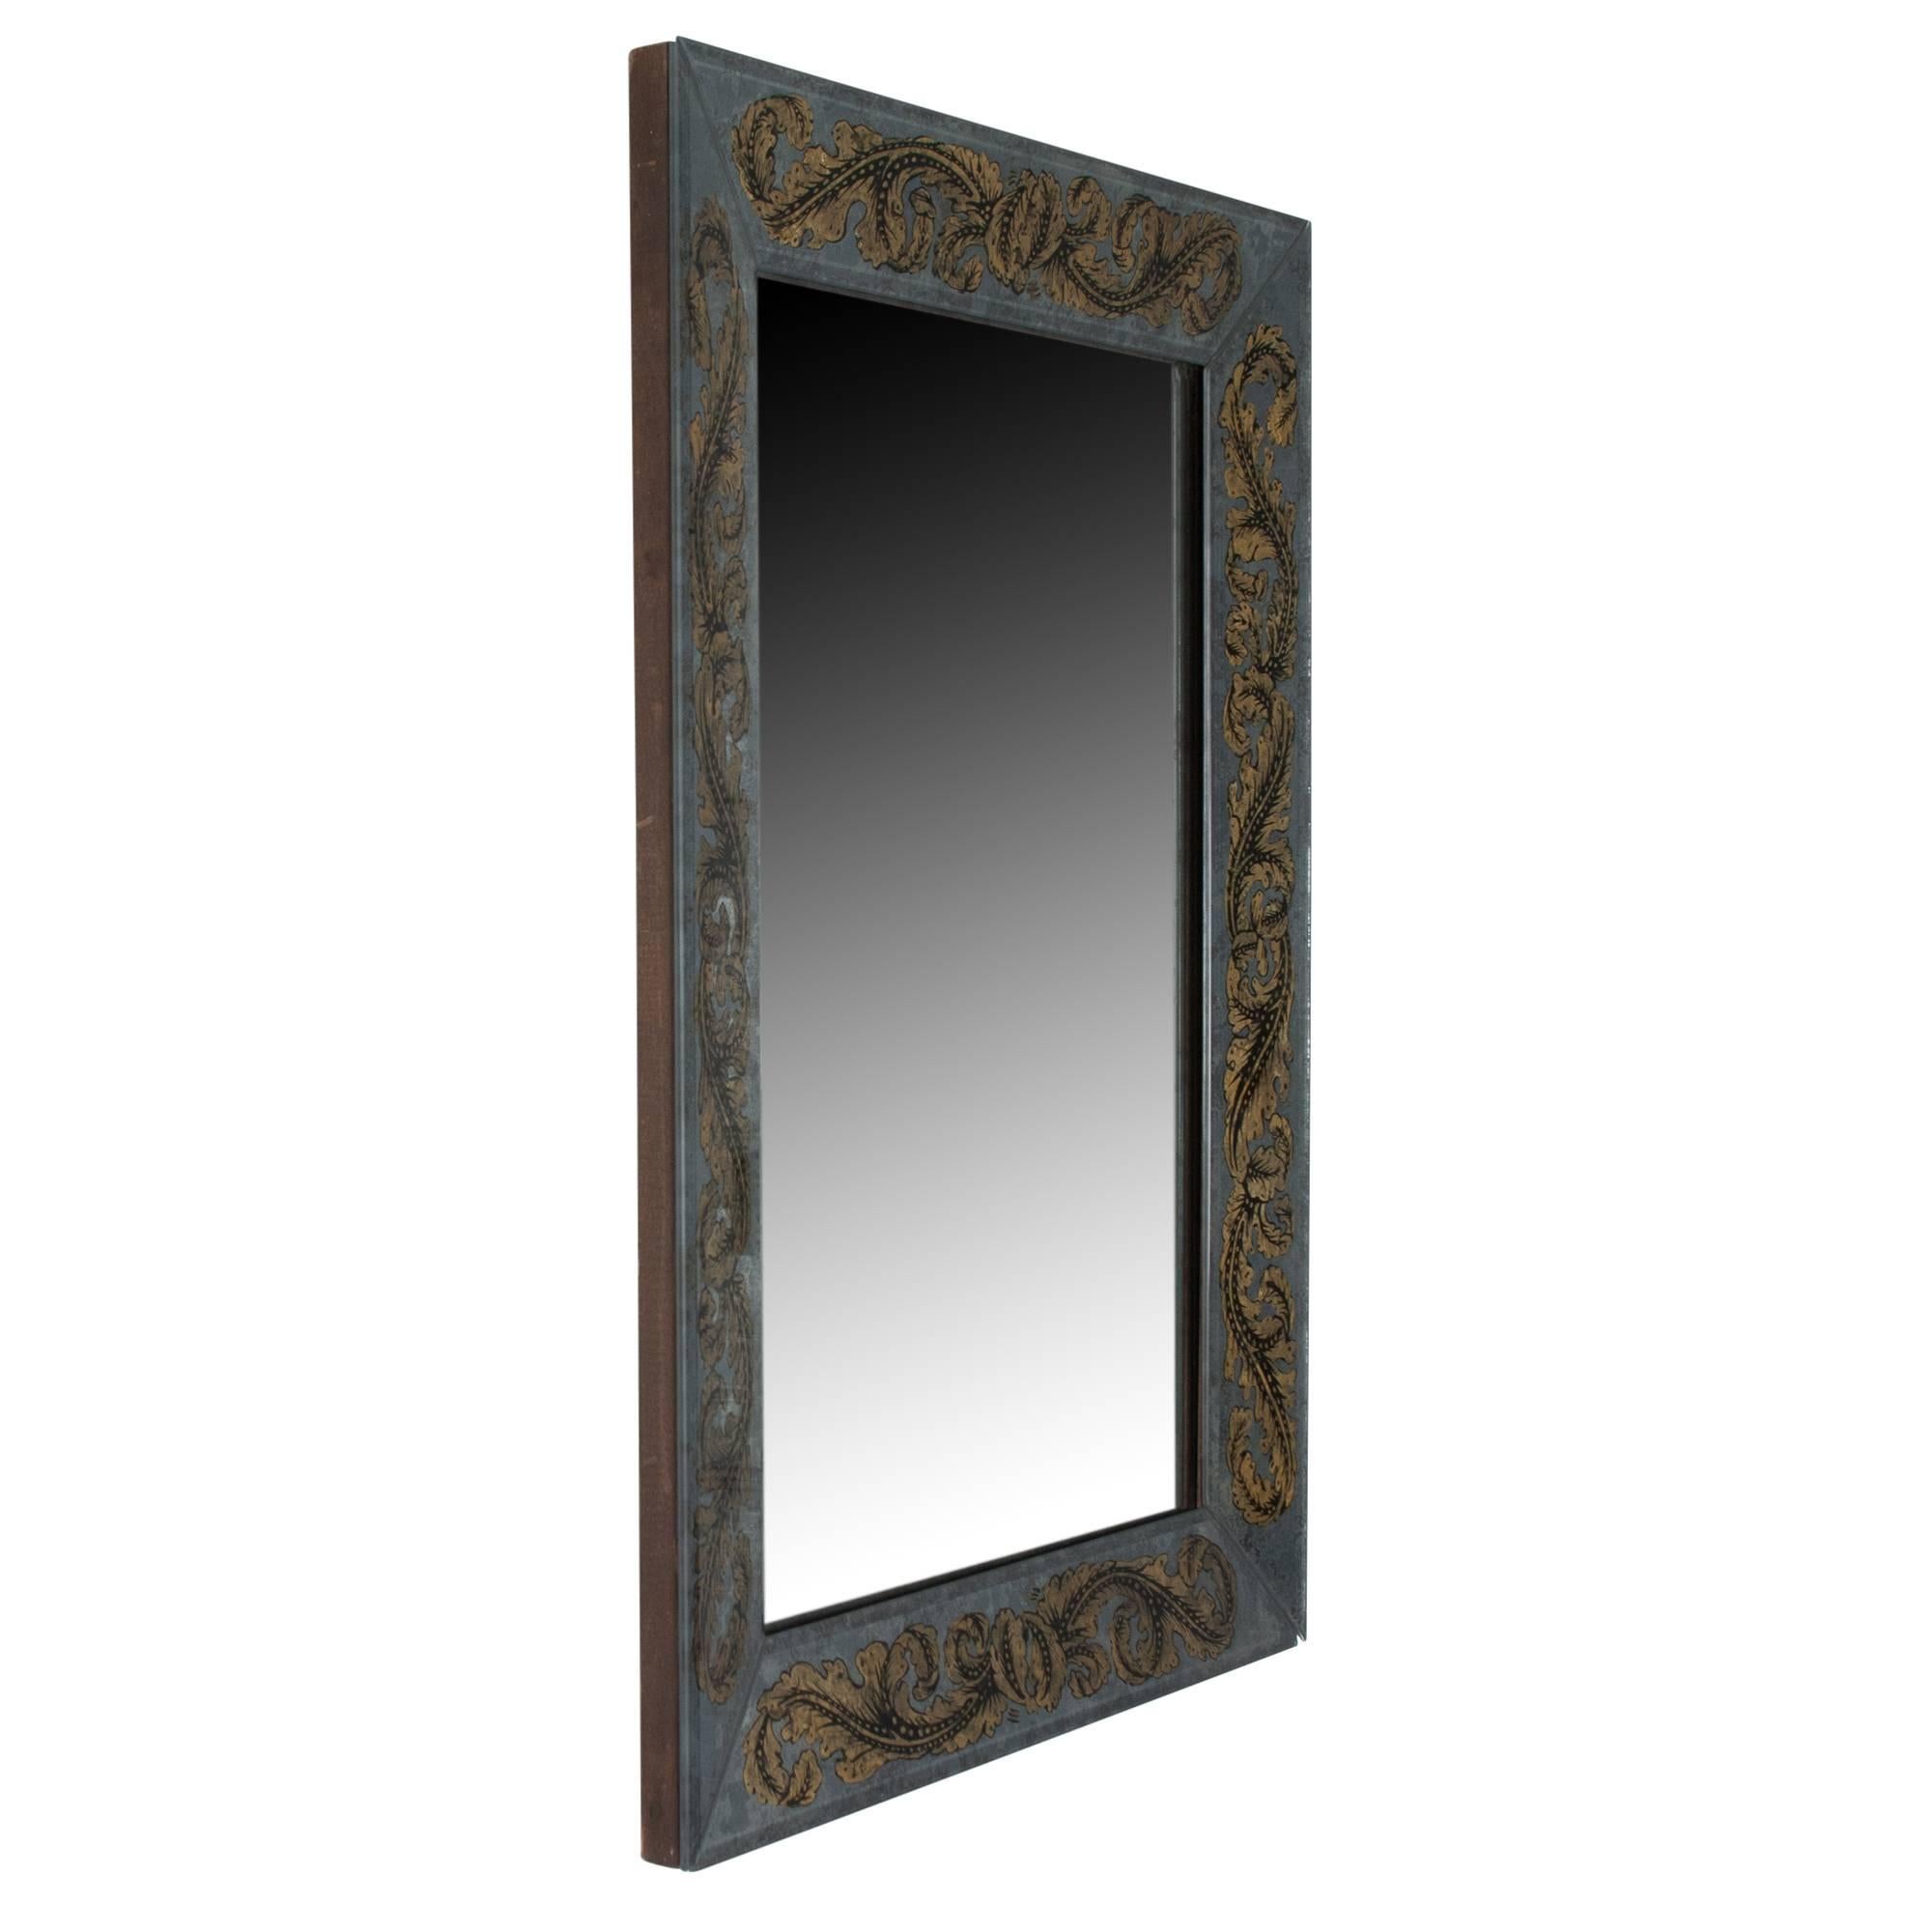 Rectangular wall mirror, antiqued mirror frame with gold foliate reverse painting, central mirror panel with antique spotting by Maison Jansen, France, 1940s. Measures: Height 29 in, width 22 in, depth 1 in.

Note: See last photos of for details